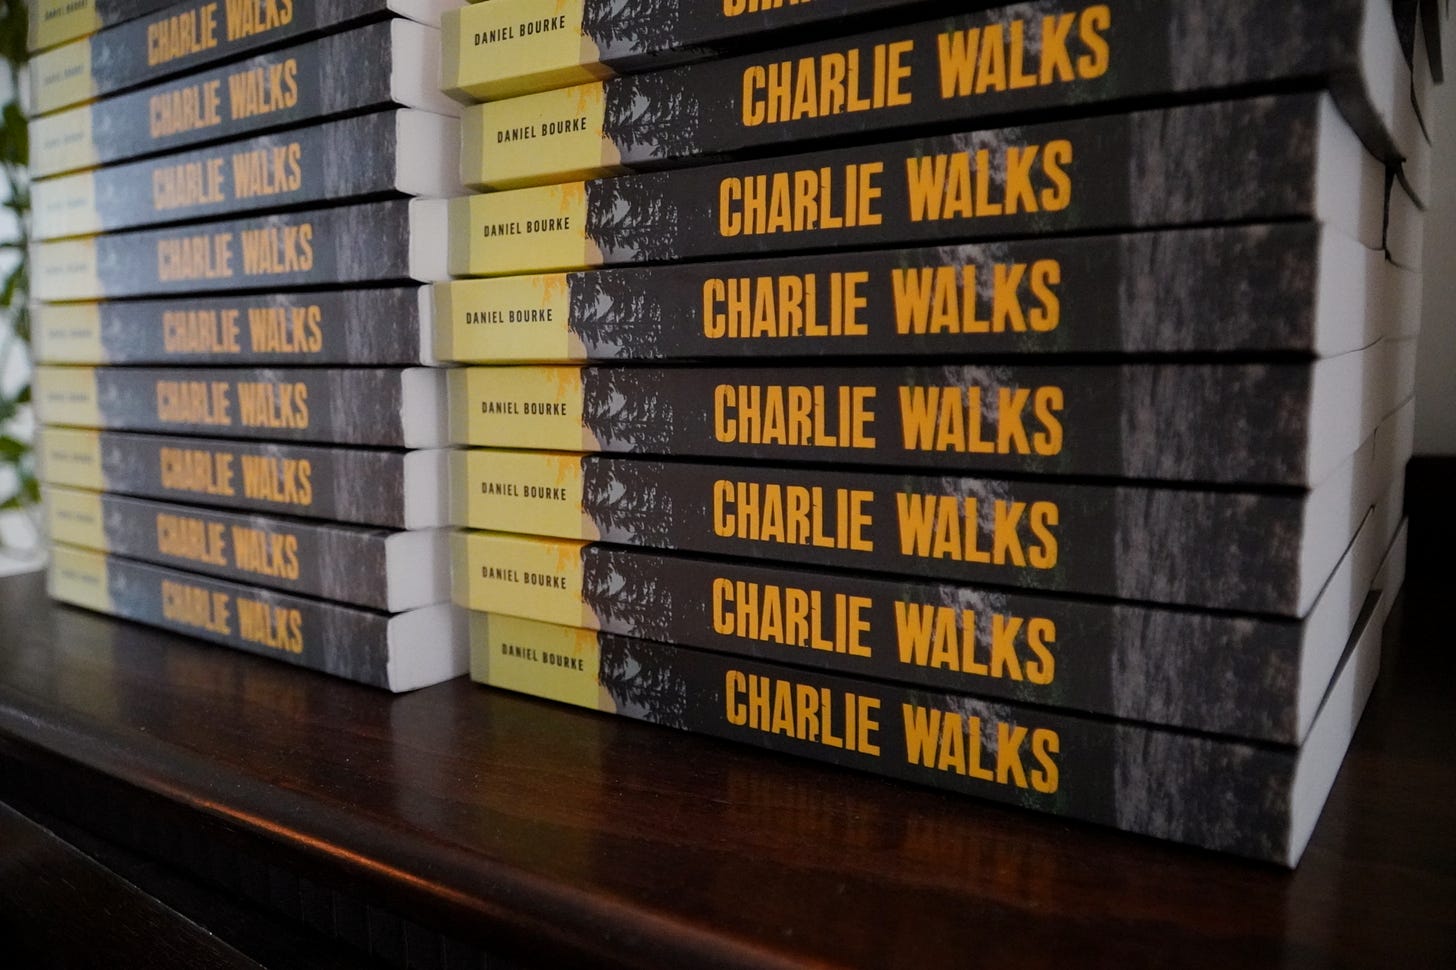 A stack of 20 or so books on top of each other with the title Charlie Walks and the author Daniel Bourke